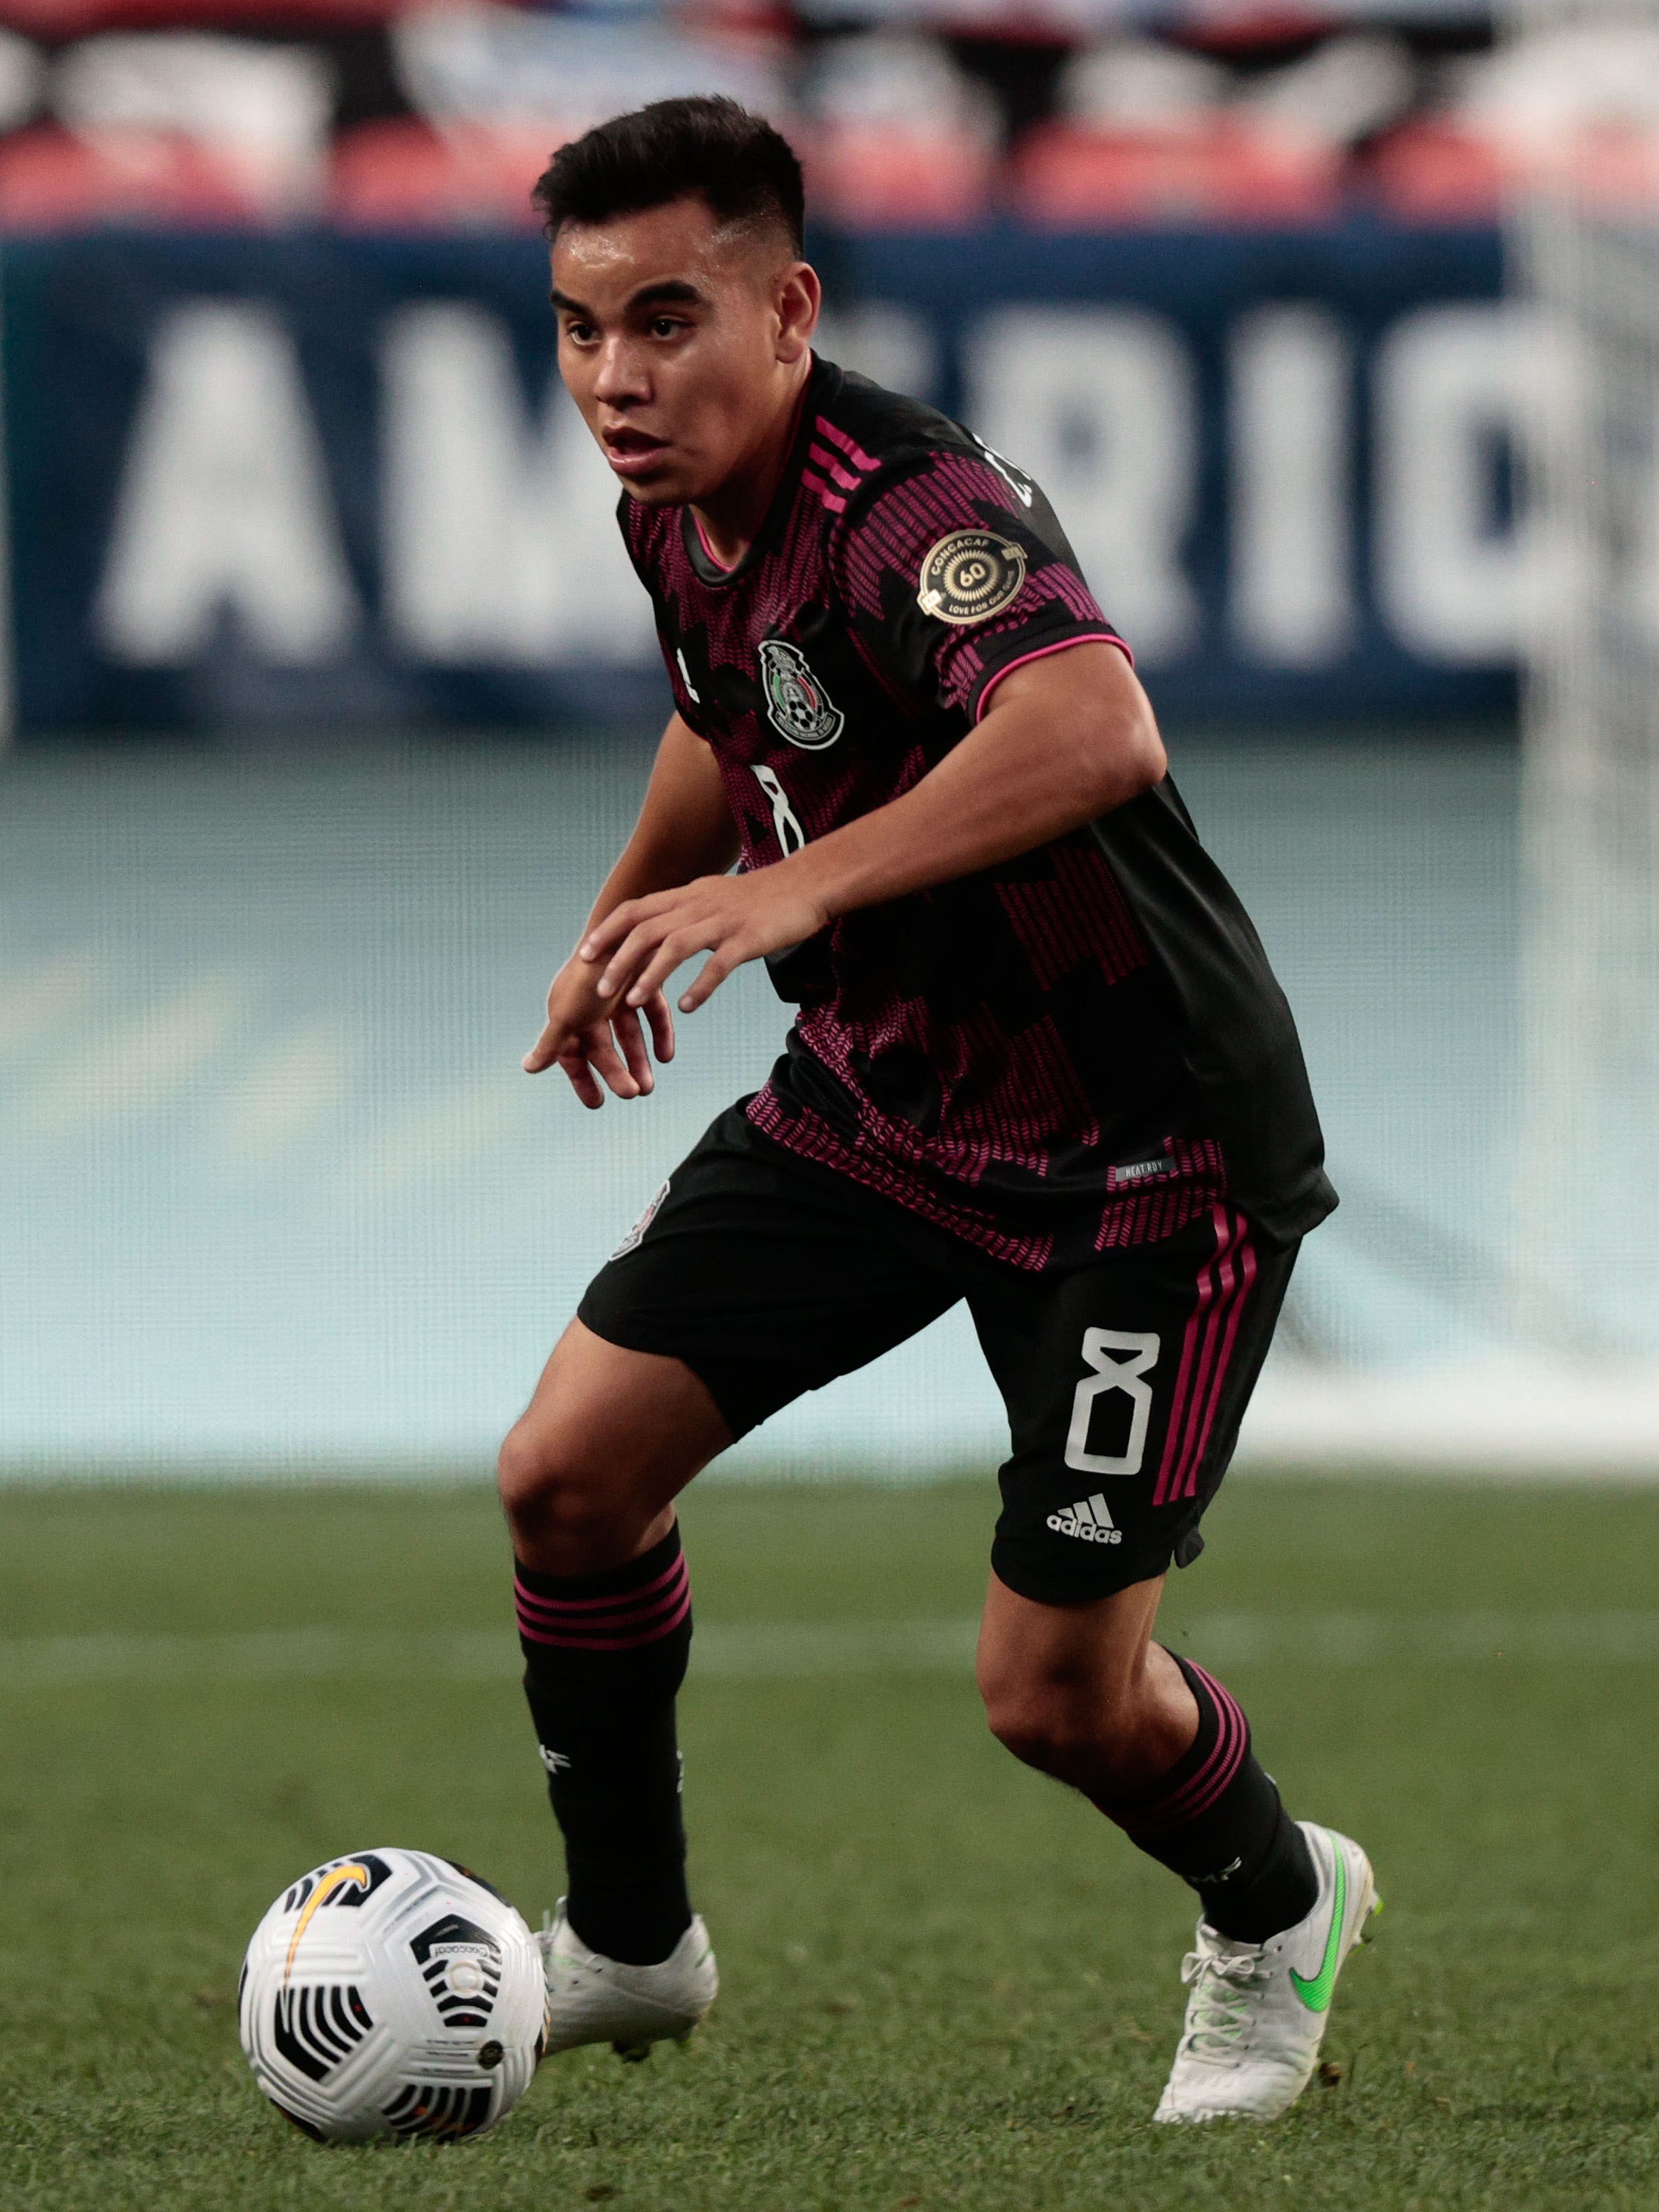 An action image of Carlos Rodriguez playing soccer.